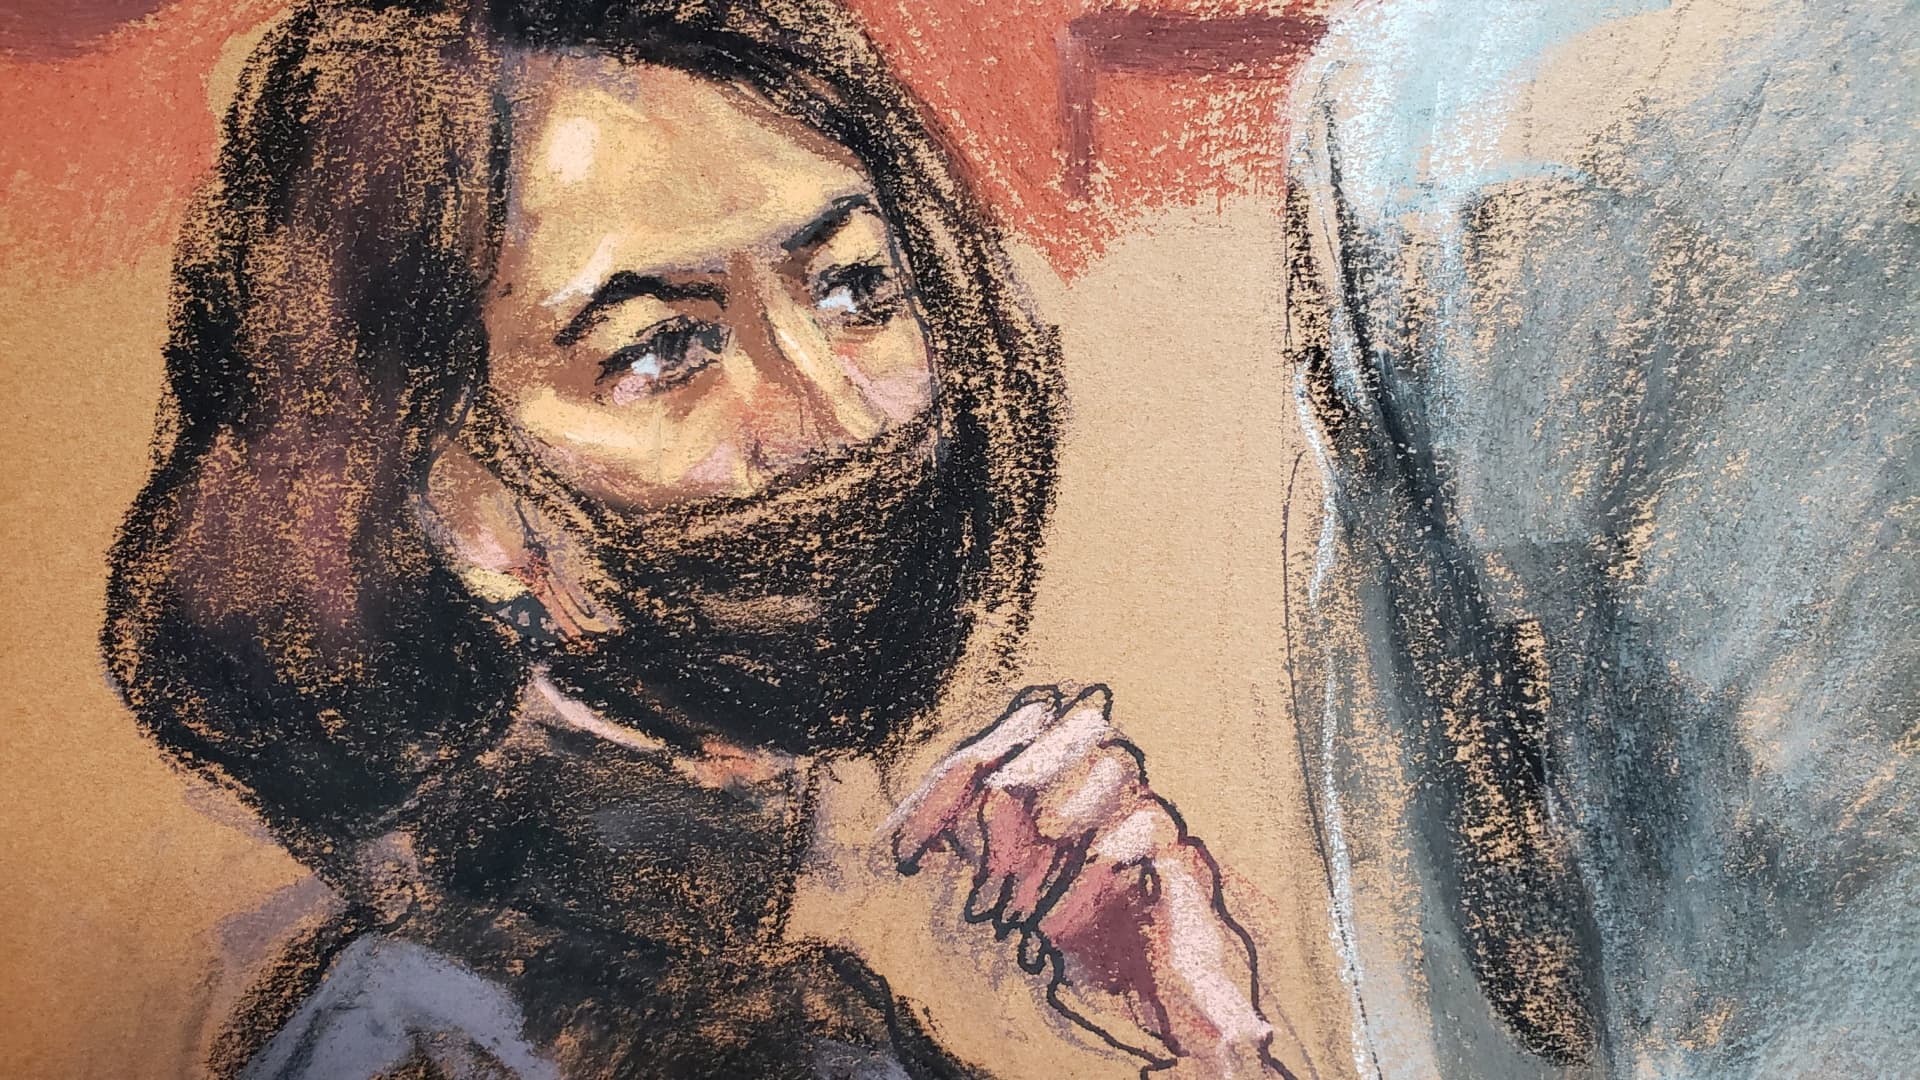 Ghislaine Maxwell watches as witness Eva Andersson is questioned by defense attorney Jeffrey Pagliuca during the trial of Maxwell, the Jeffrey Epstein associate accused of sex trafficking, in a courtroom sketch in New York City, December 17, 2021.